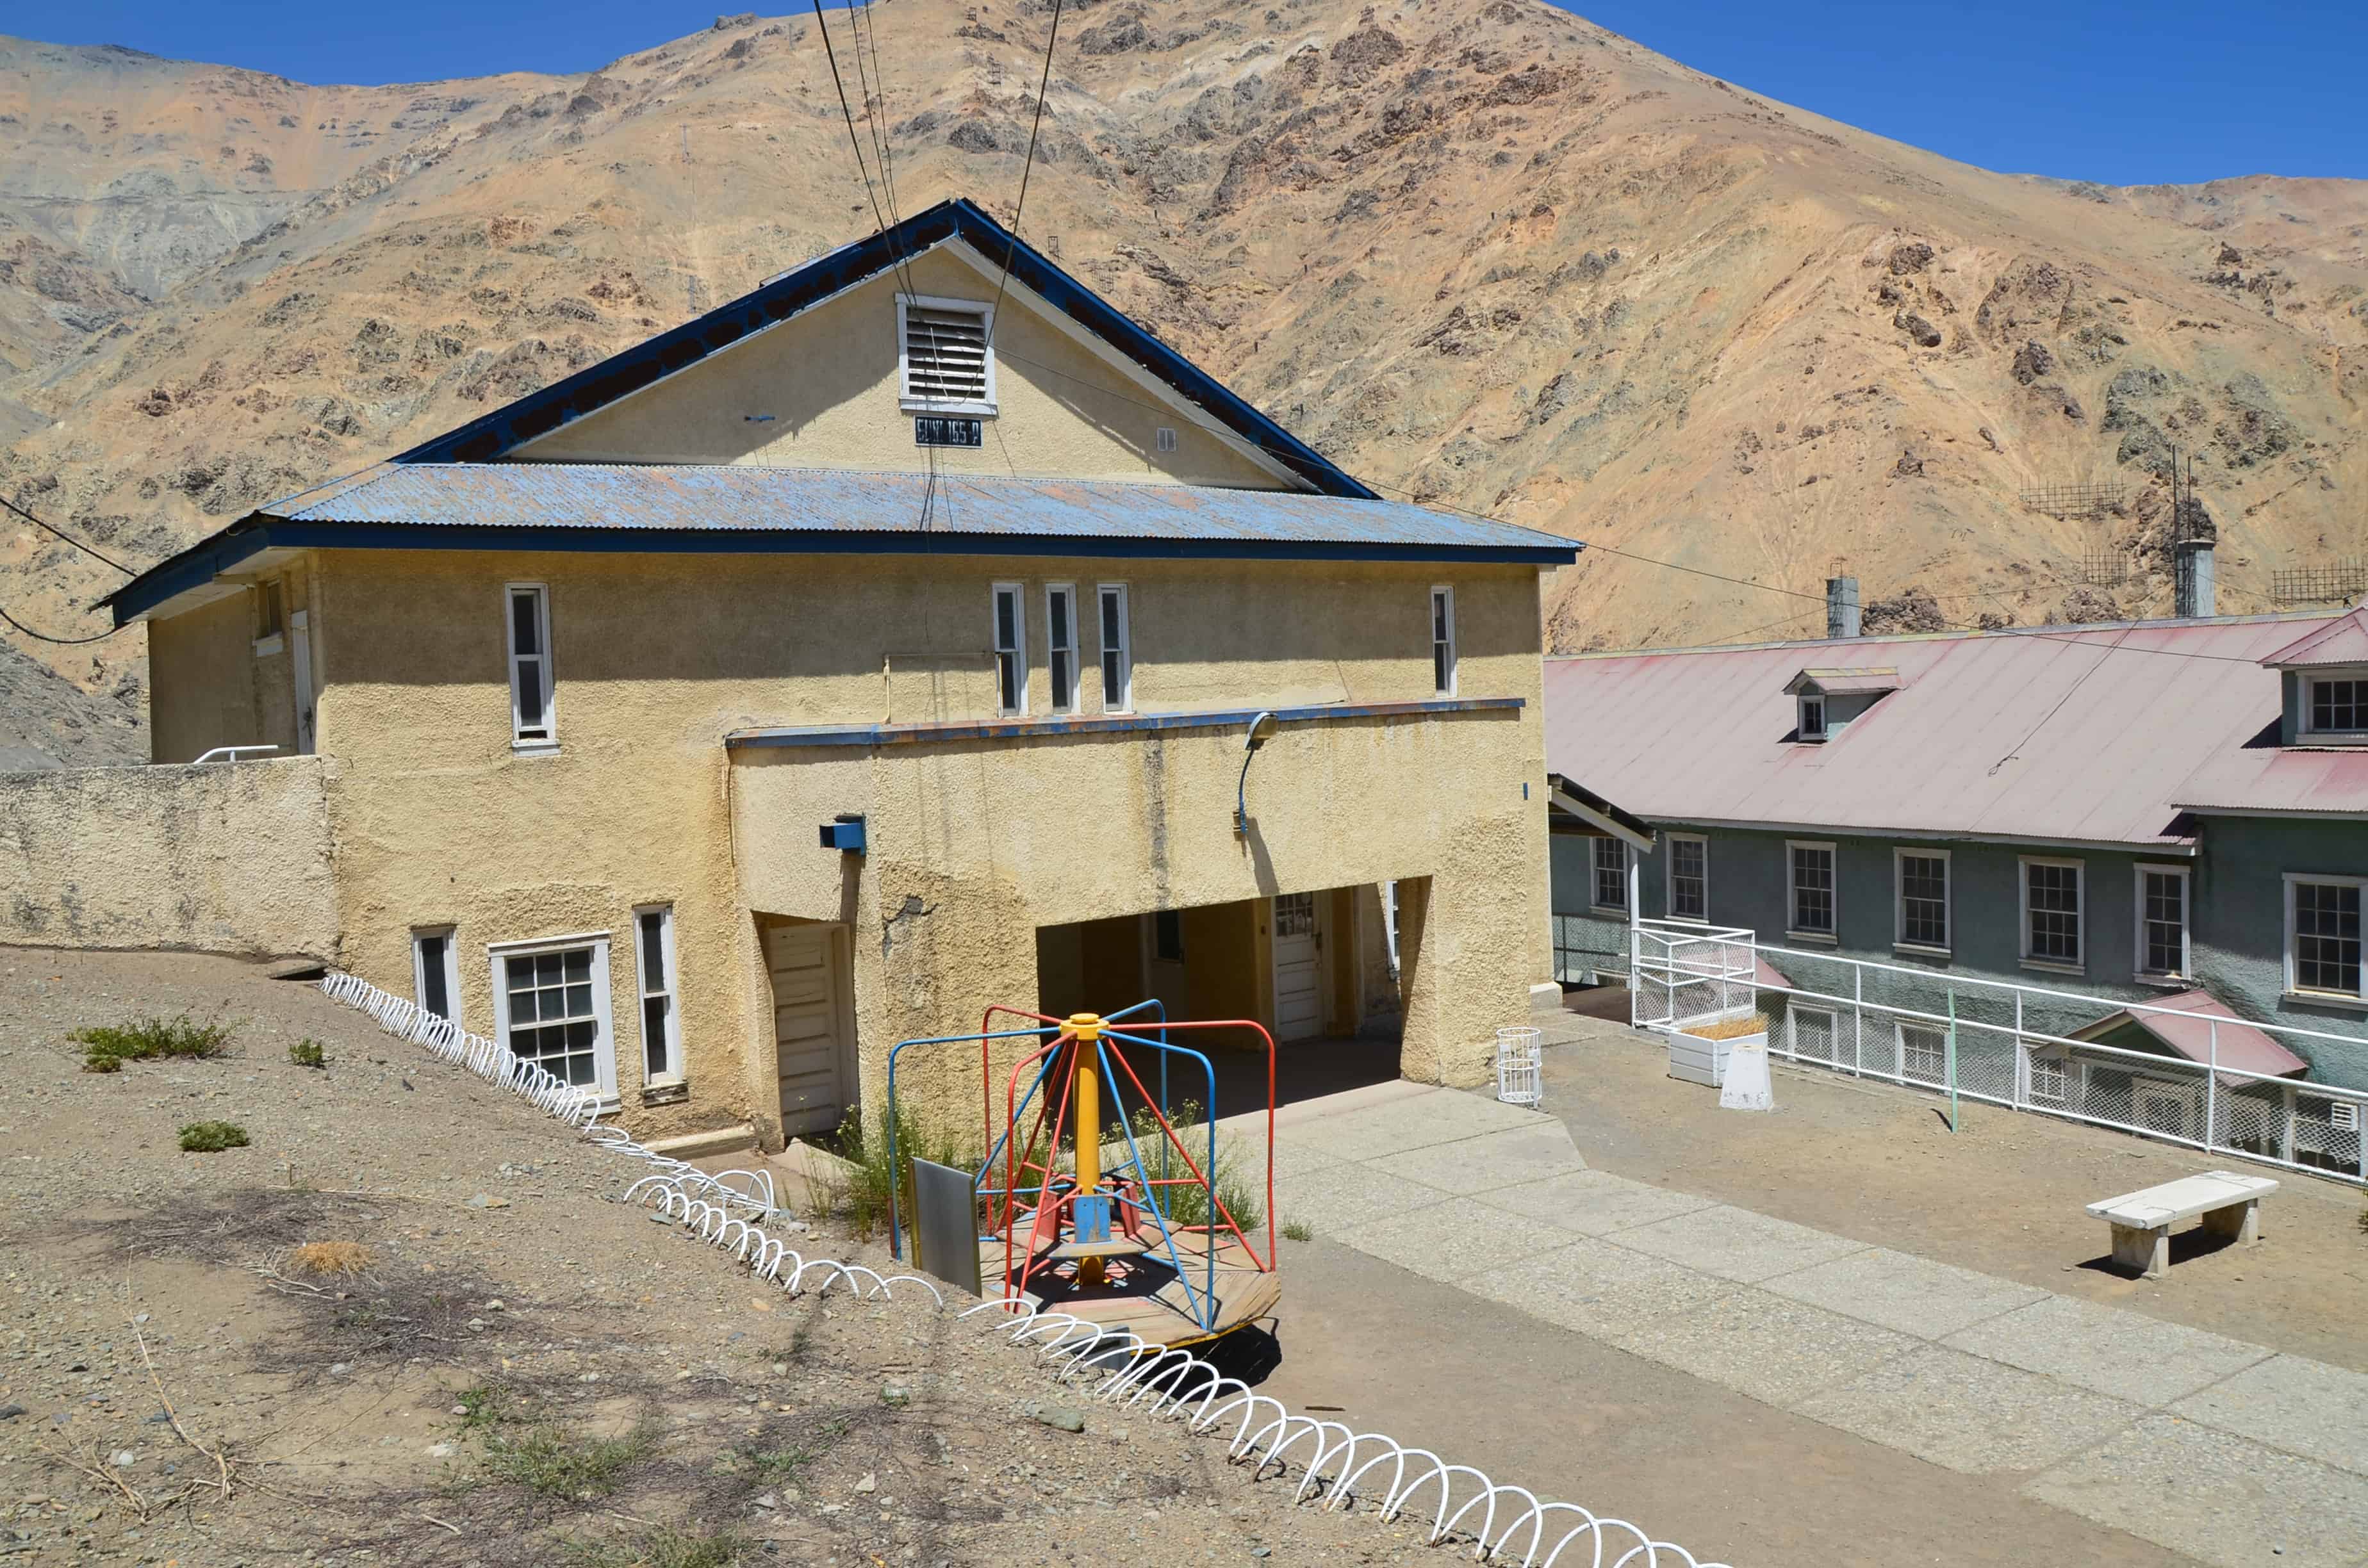 School at Sewell Mining Town, Chile